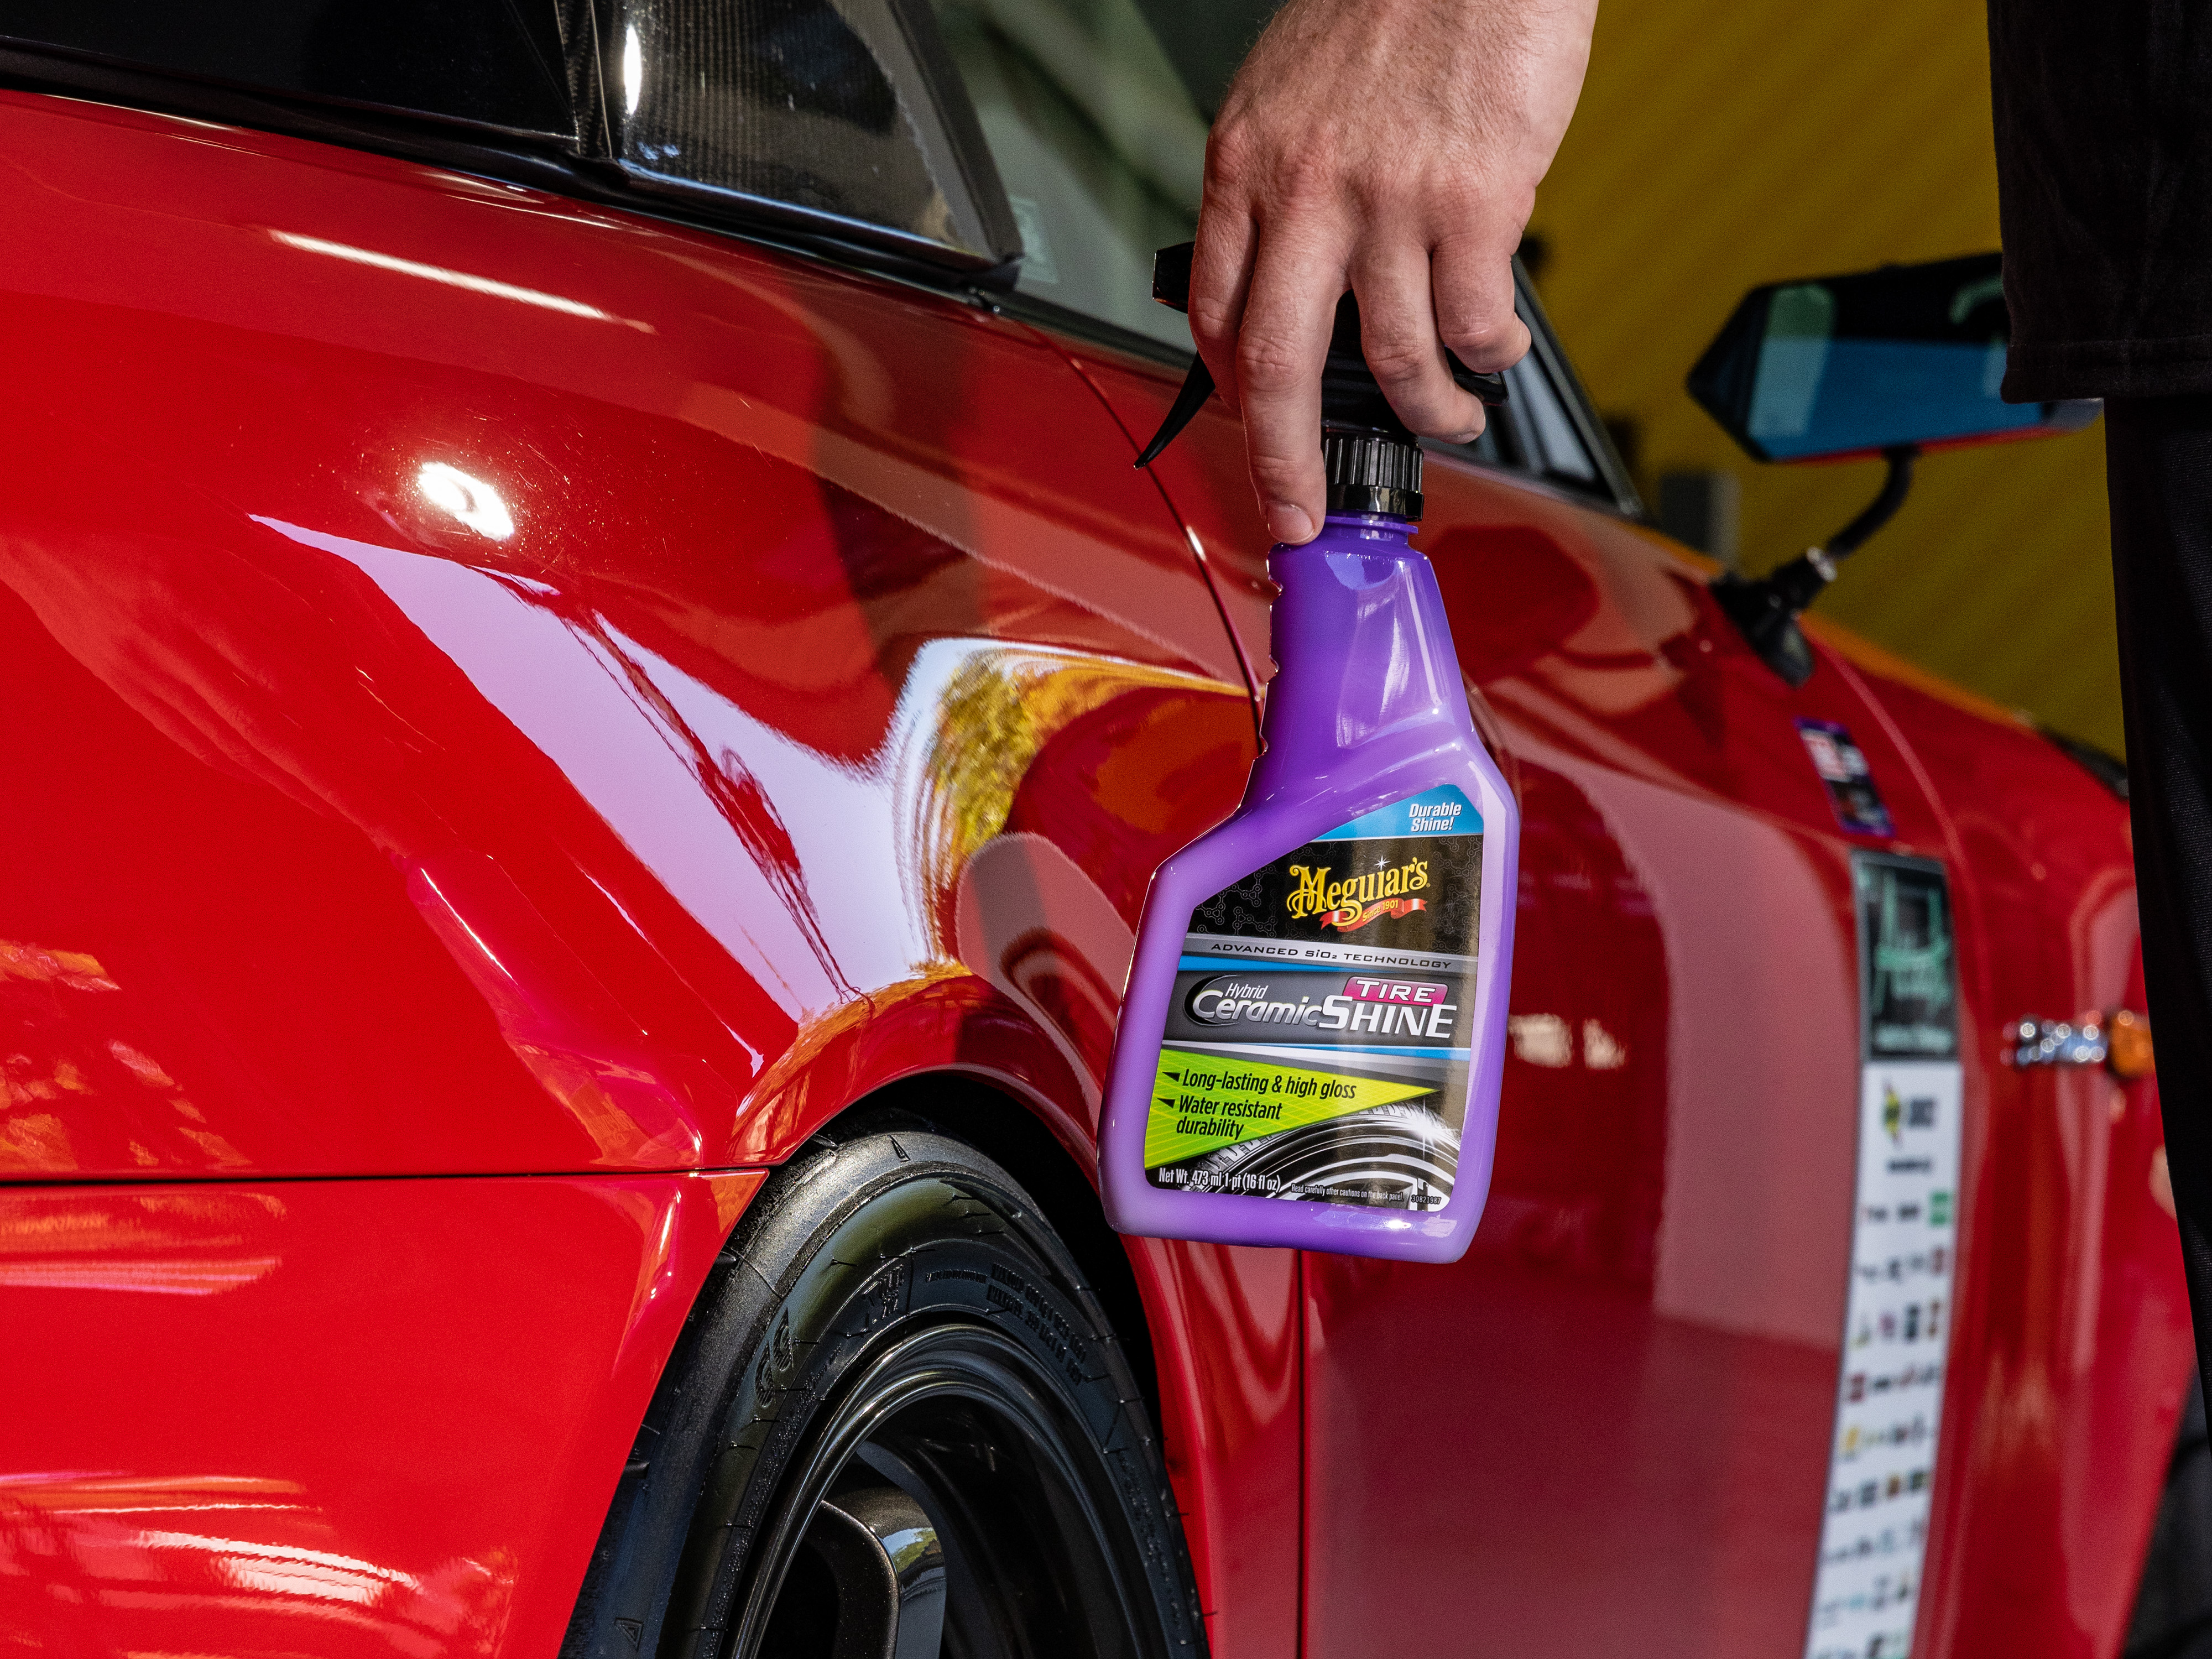 Meguiar's hot shine tire coating the best way to apply 